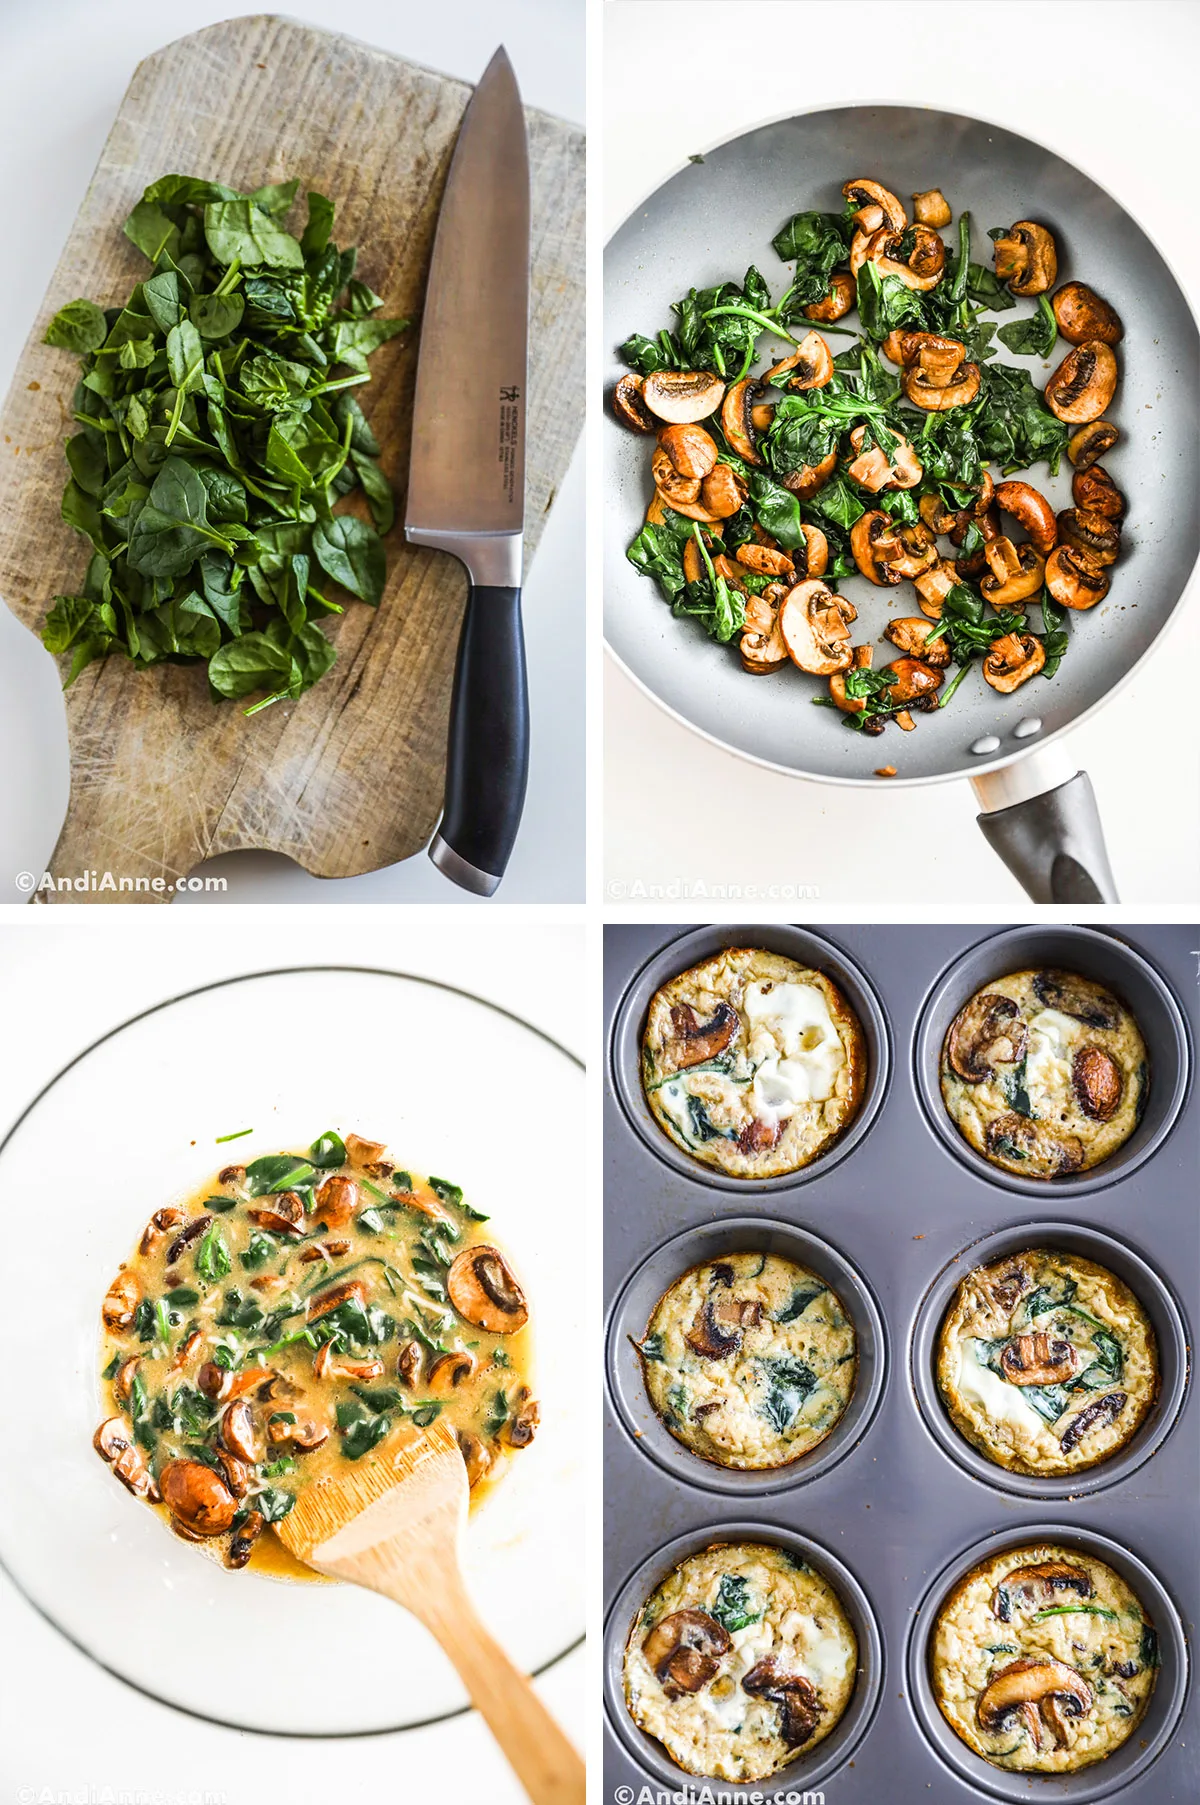 Four images grouped together. First is chopped spinach with a knife. Second is spinach and mushrooms cooking in frying pan. Third is raw egg liquid with spinach and mushrooms. Fourth is baked eggs in a muffin pan.